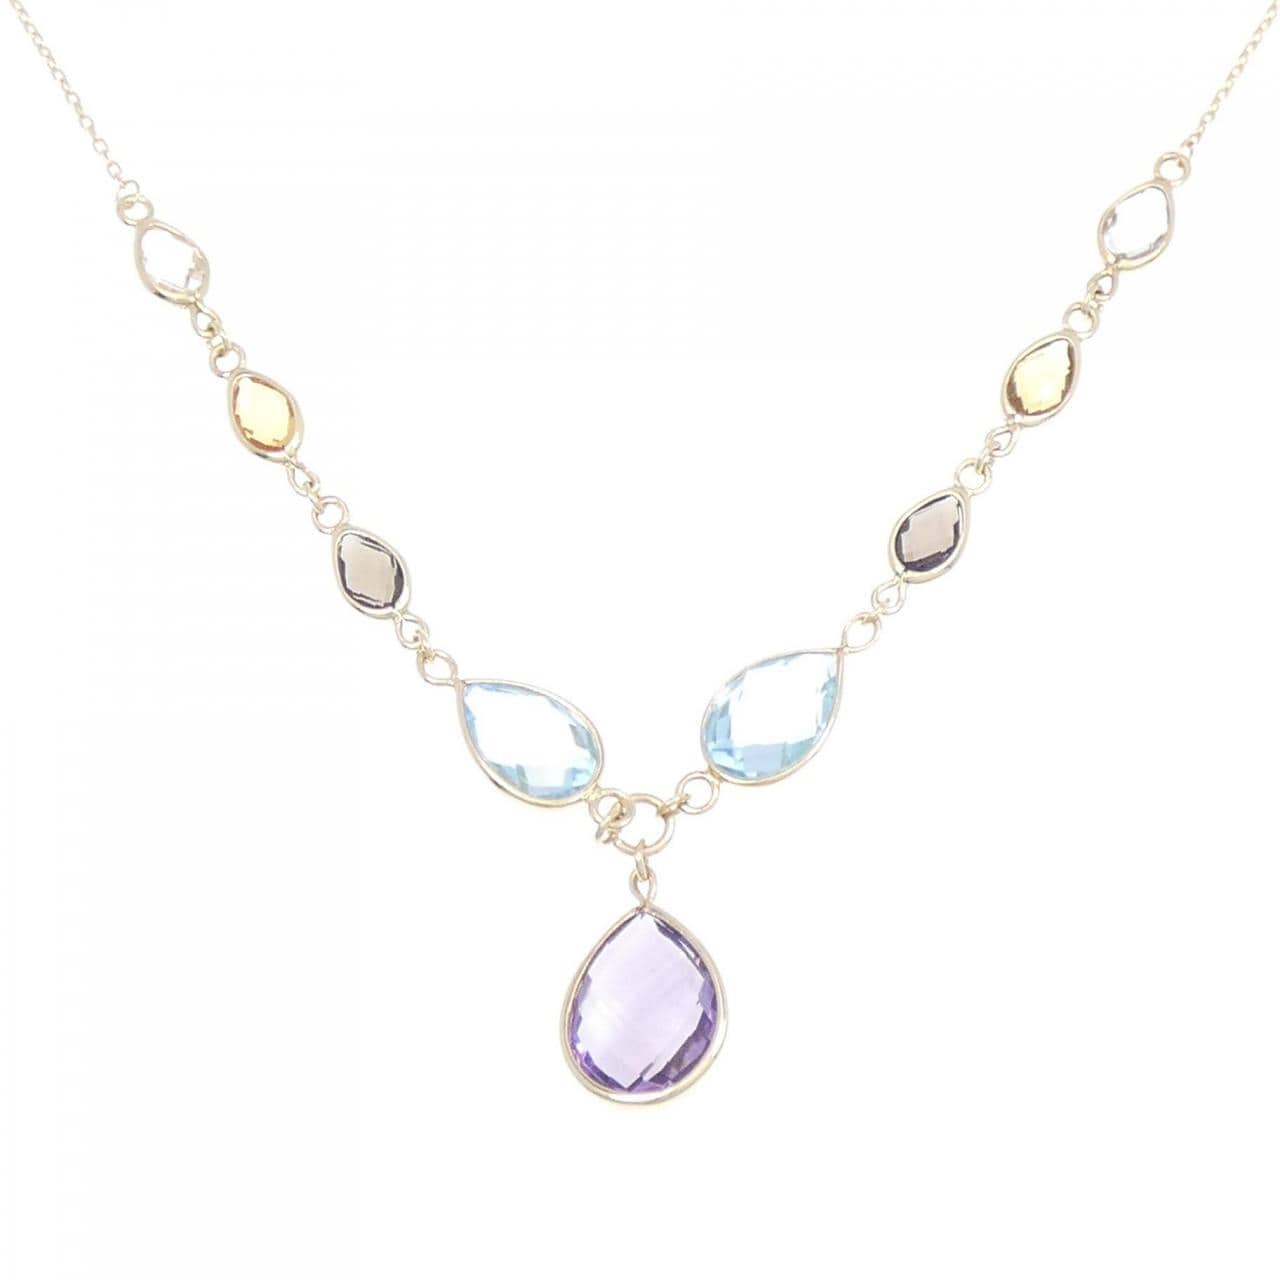 750YG colored stone necklace